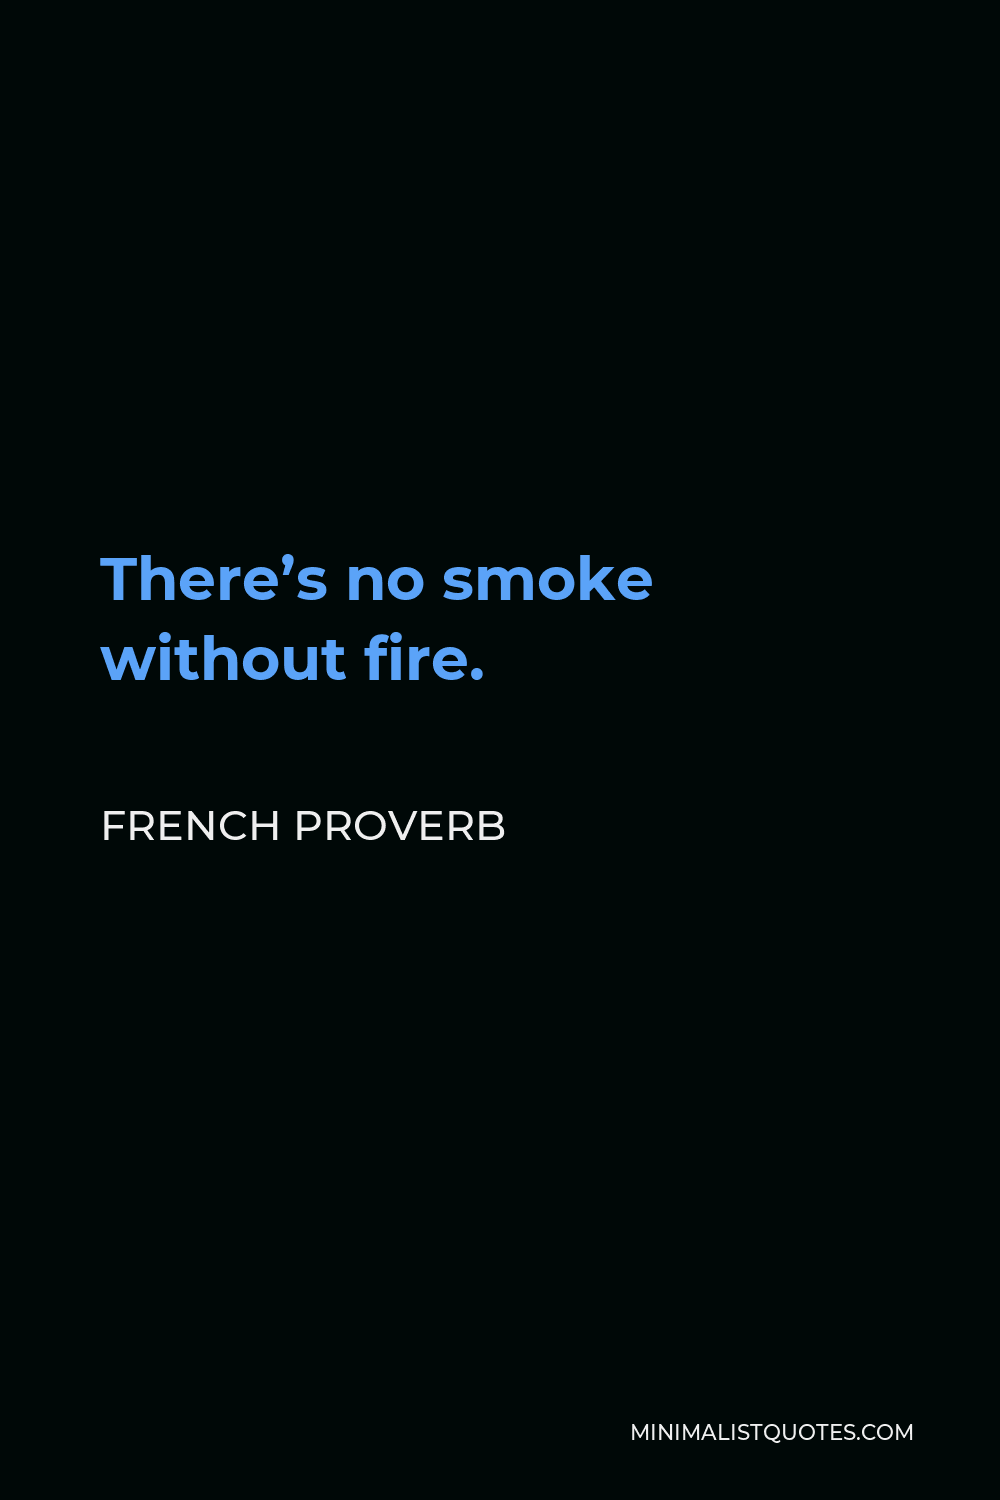 French Proverb Quote - There’s no smoke without fire.